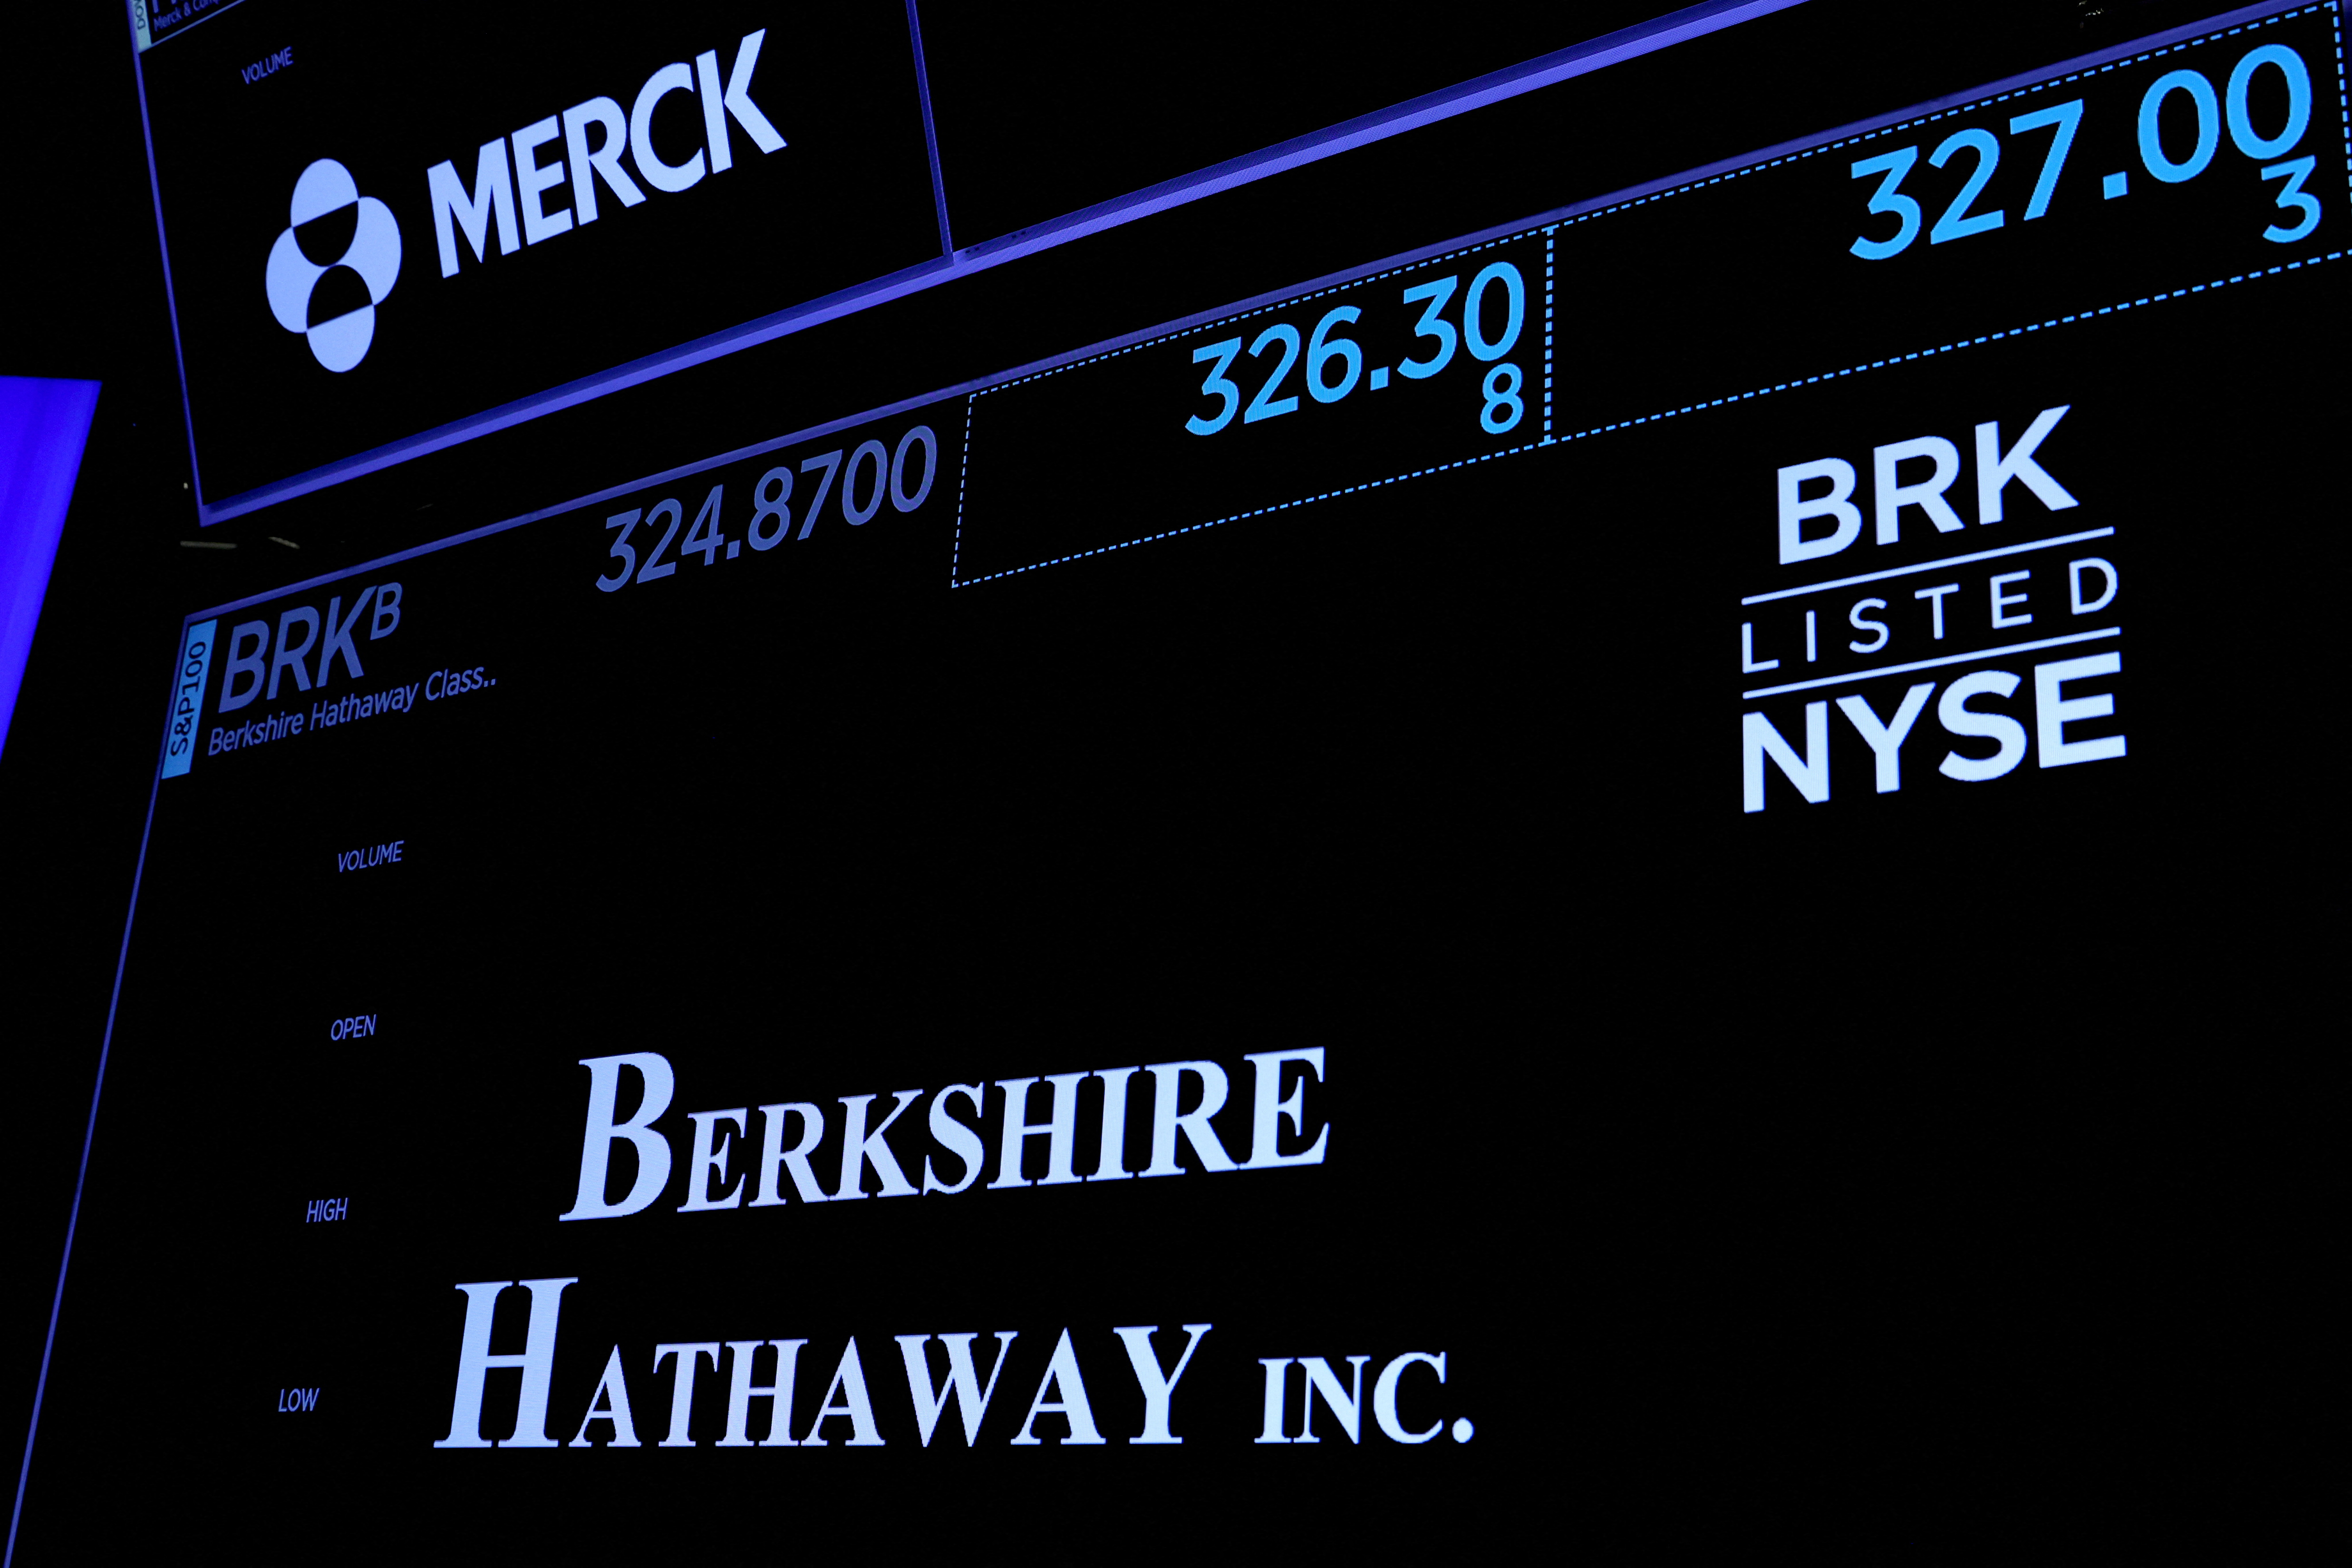 Trading information and logo for Berkshire Hathaway is displayed on a screen on the floor of the NYSE in New York